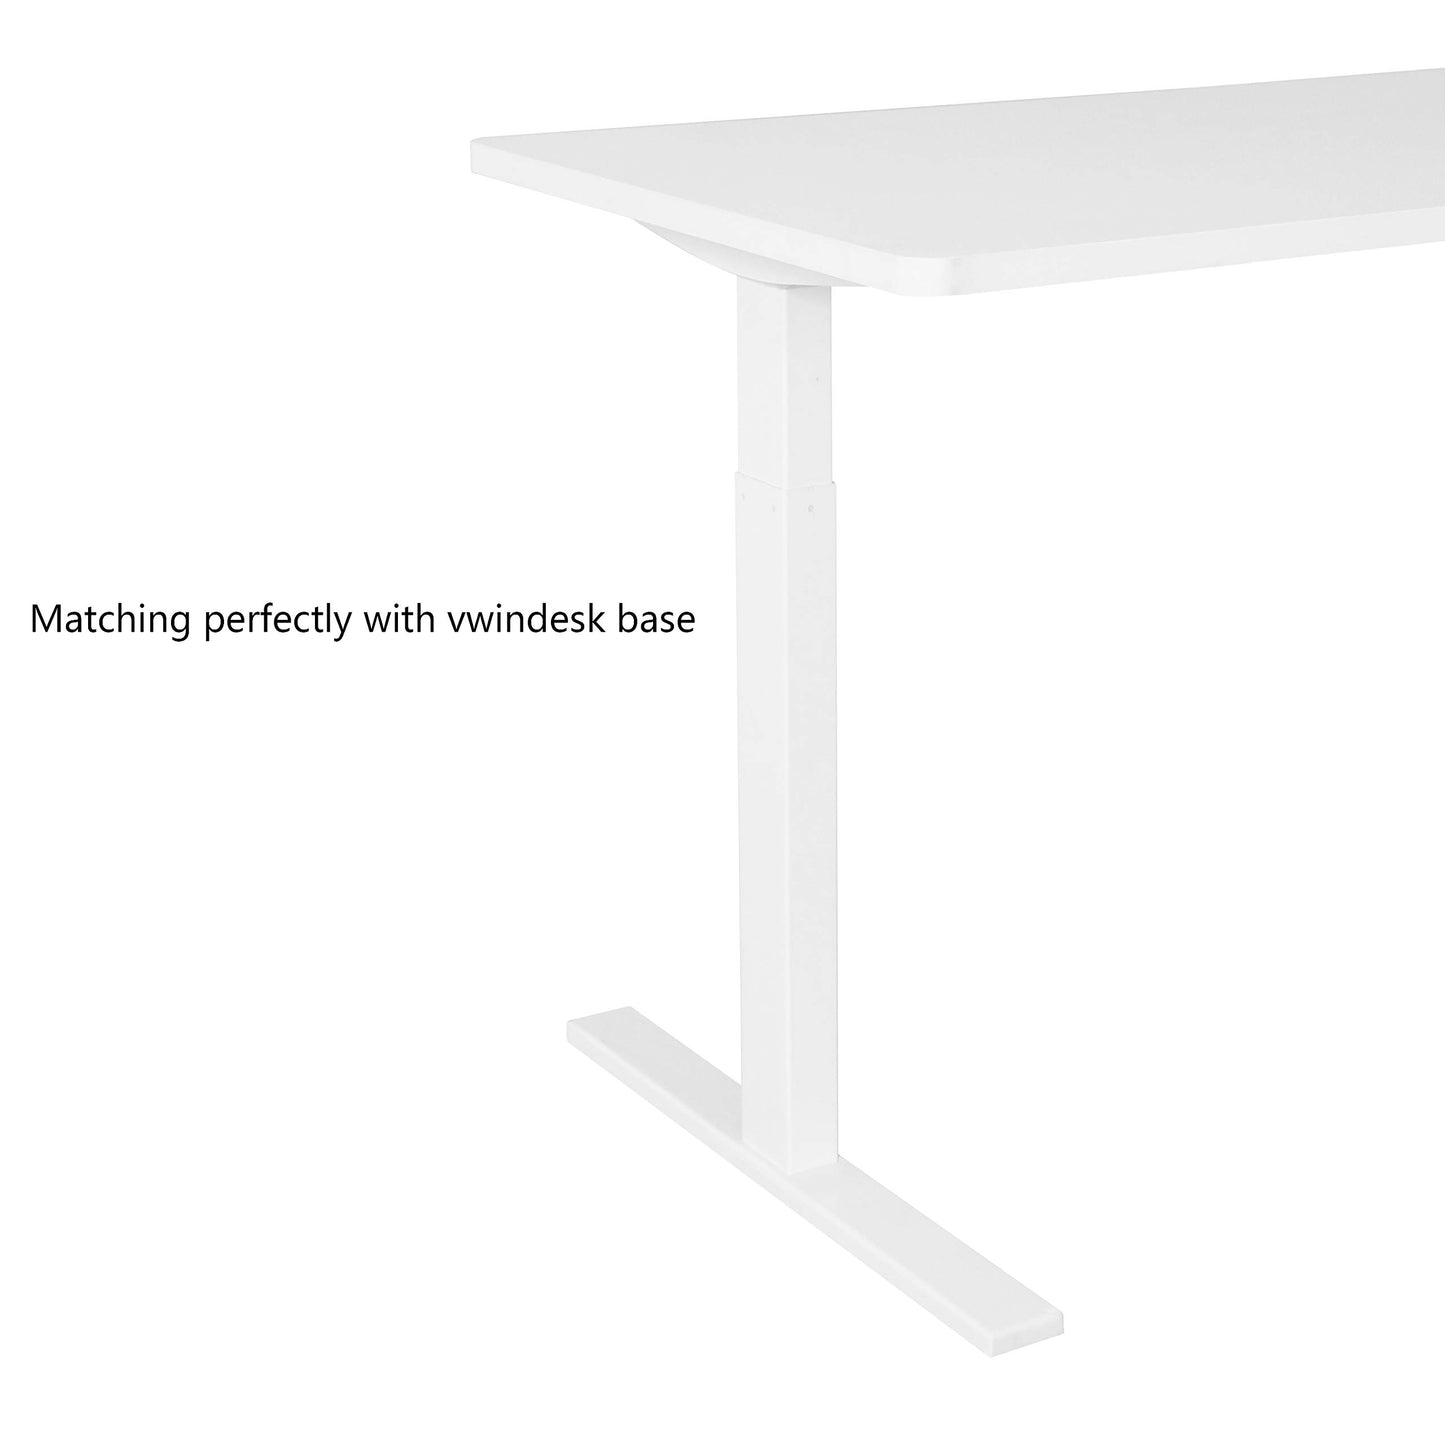 VWINDESK Wooden Material 80 inch MDF Desktop or Tabletop Only, Matching with Electric Adjustable Standing Desk Frame,with 80mm gromment Holes,White Color(80" x 30" x 1")